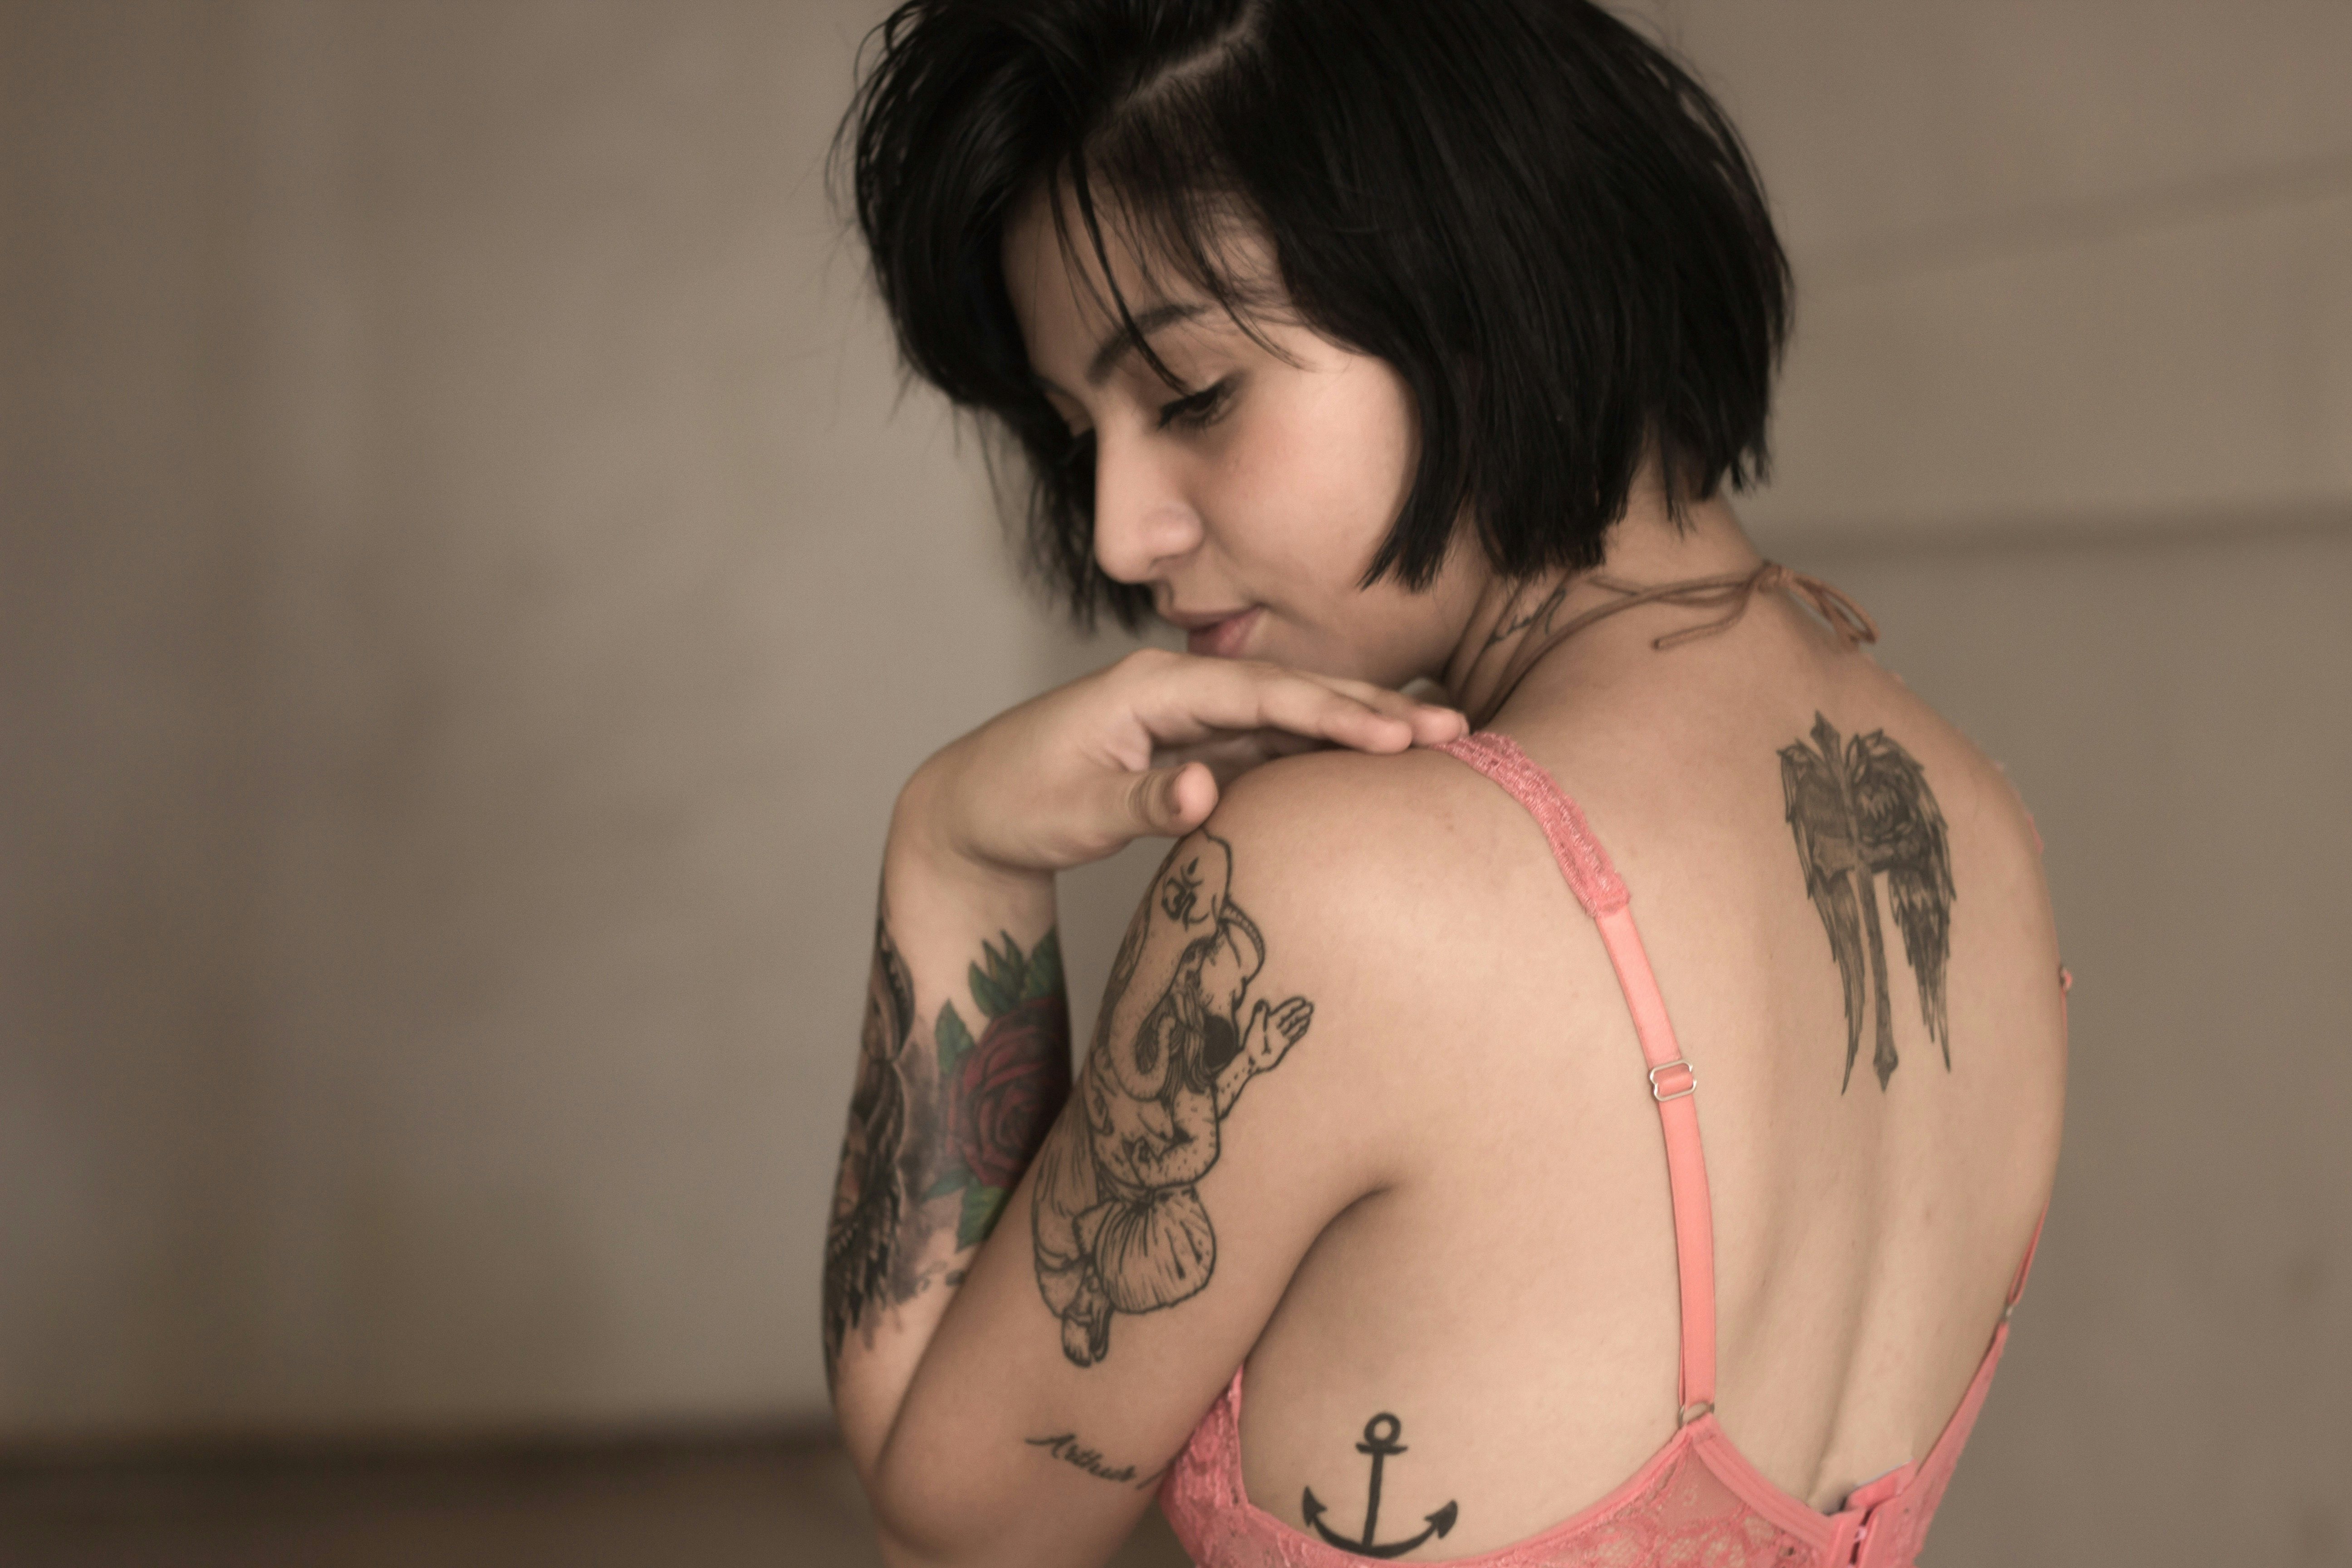 Pimples on tattoos Causes treatments and prevention